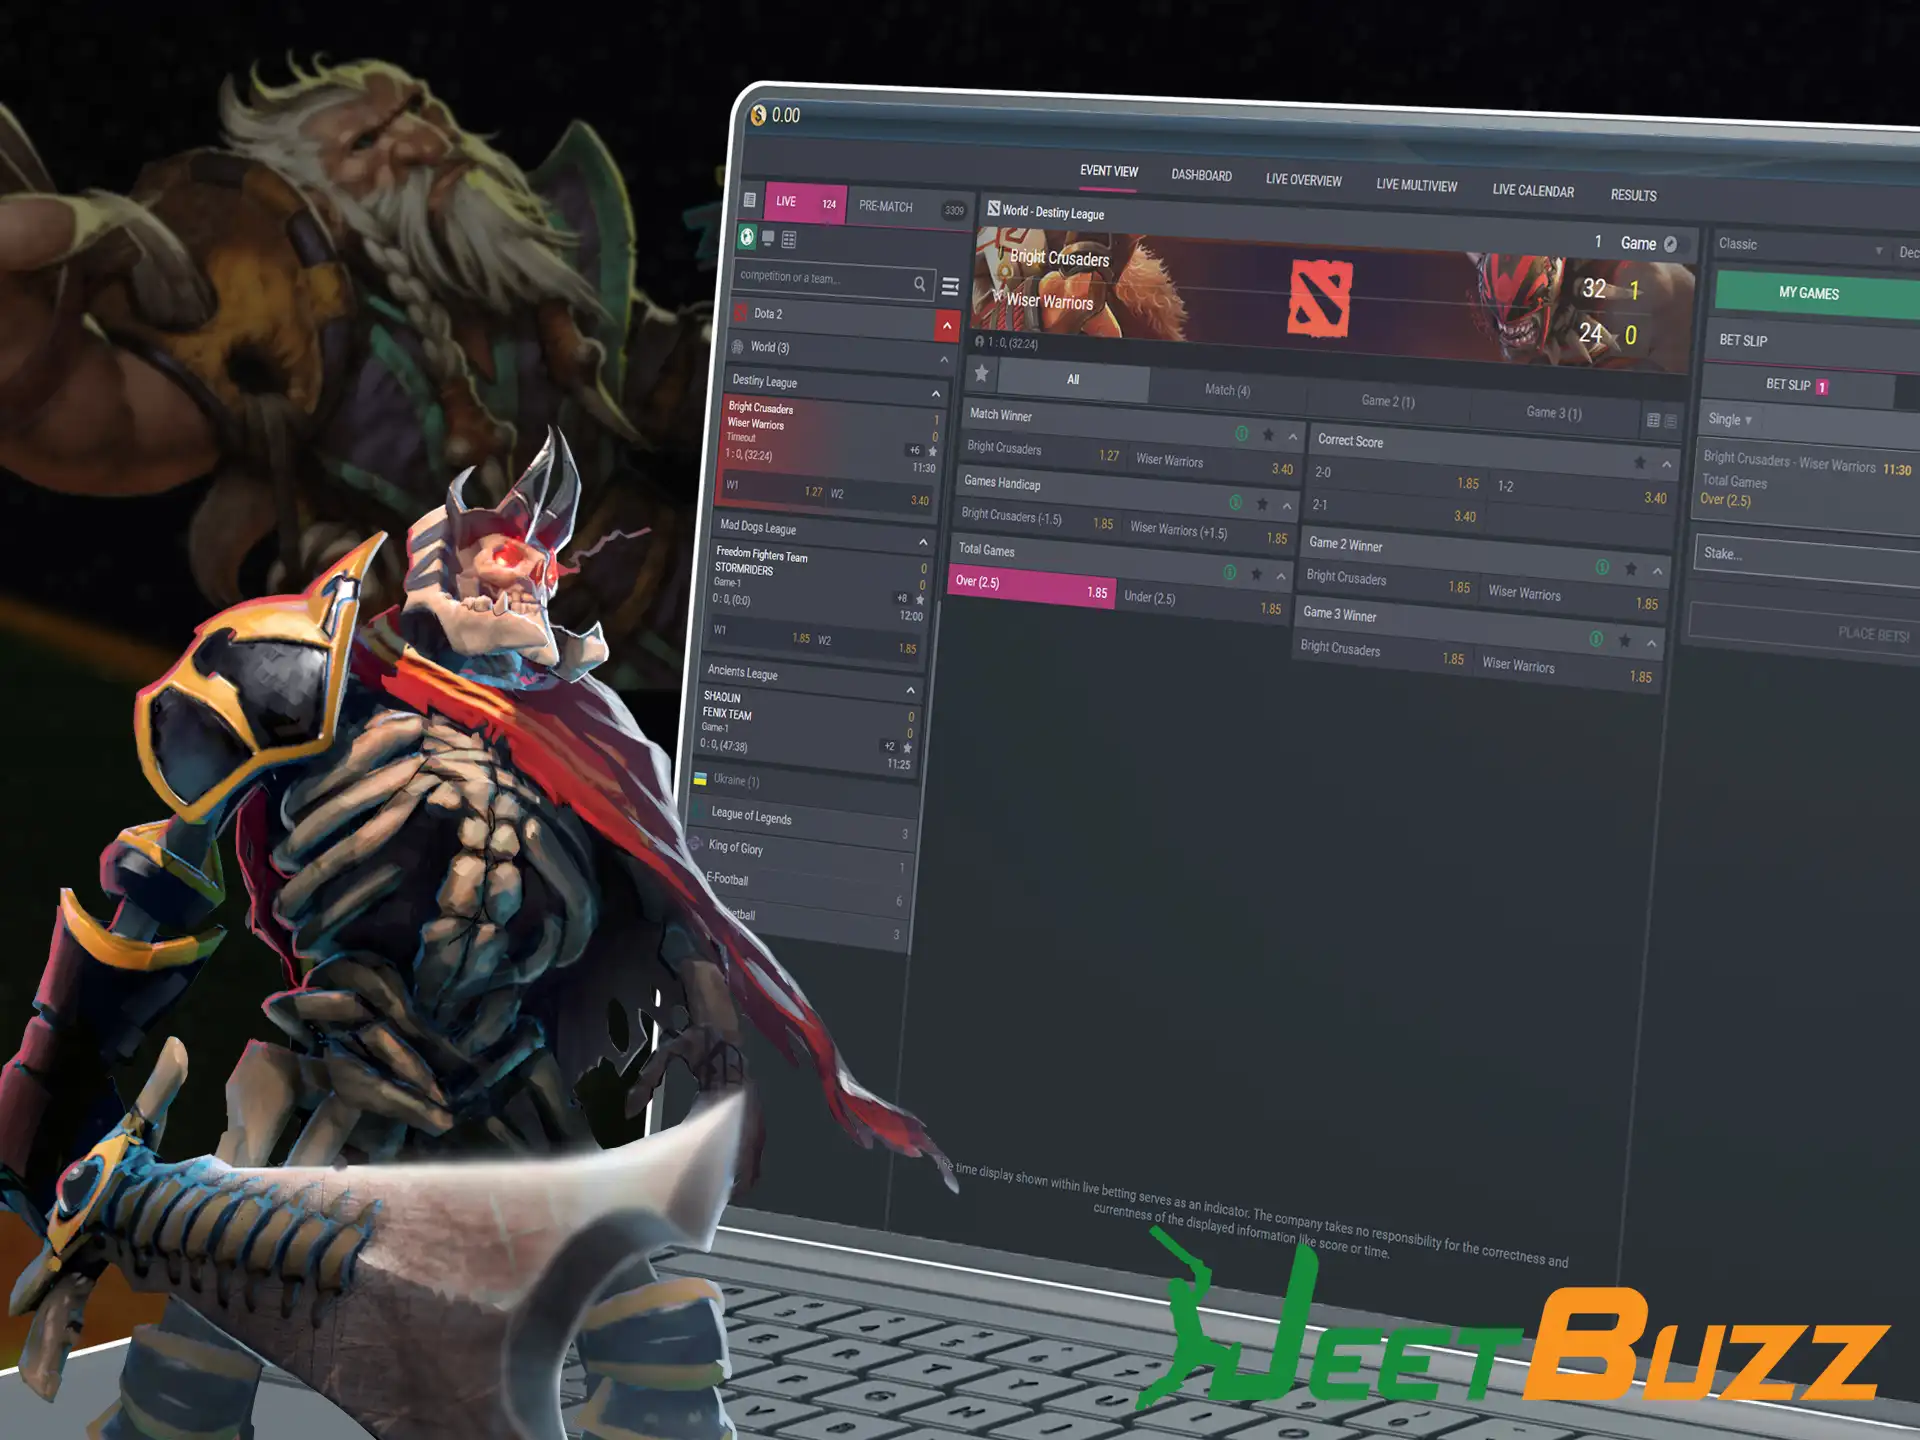 Online betting on Dota 2 is available at JeetBuzz.